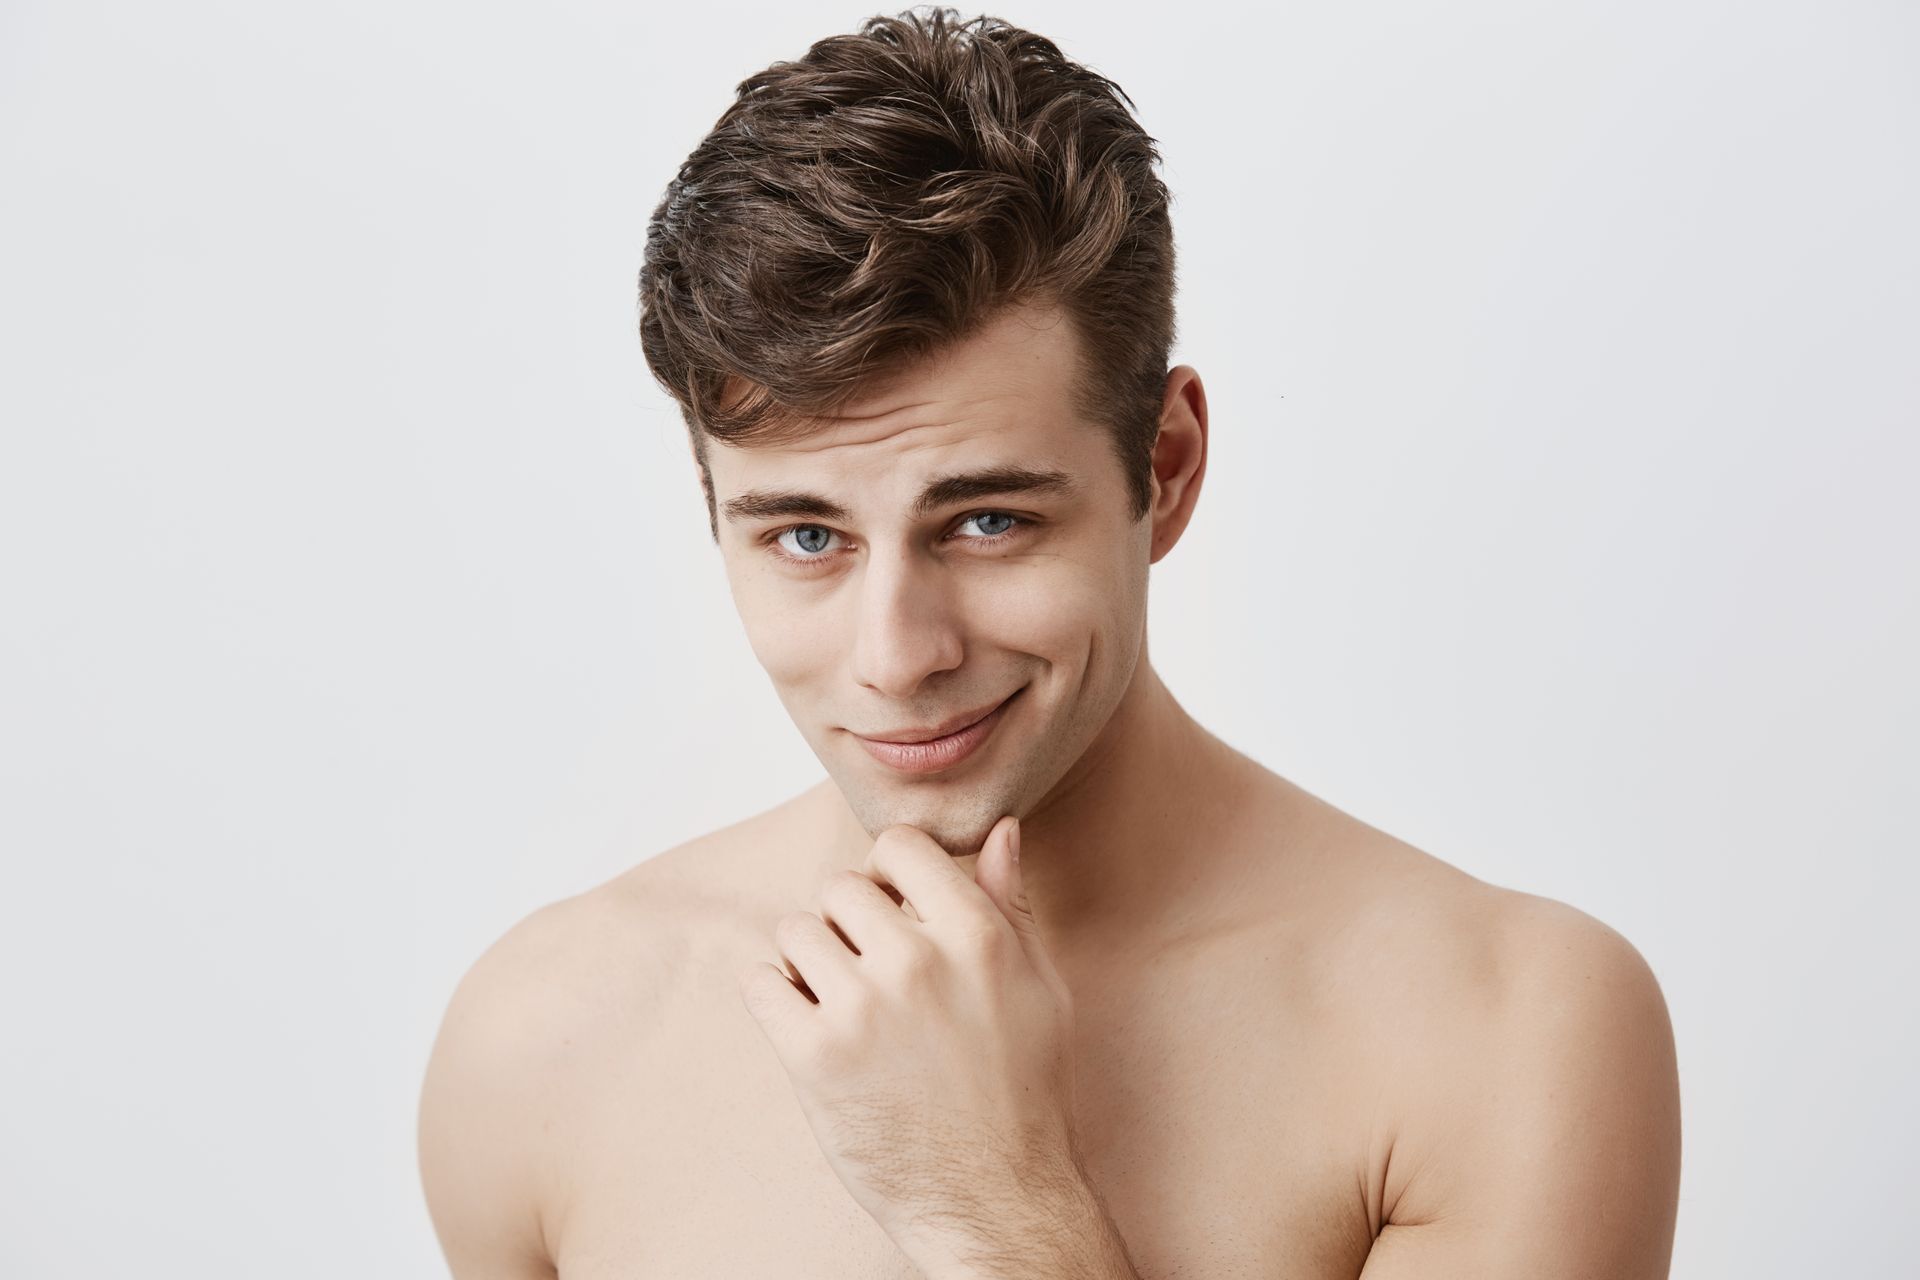 a shirtless man is smiling with his hand on his chin